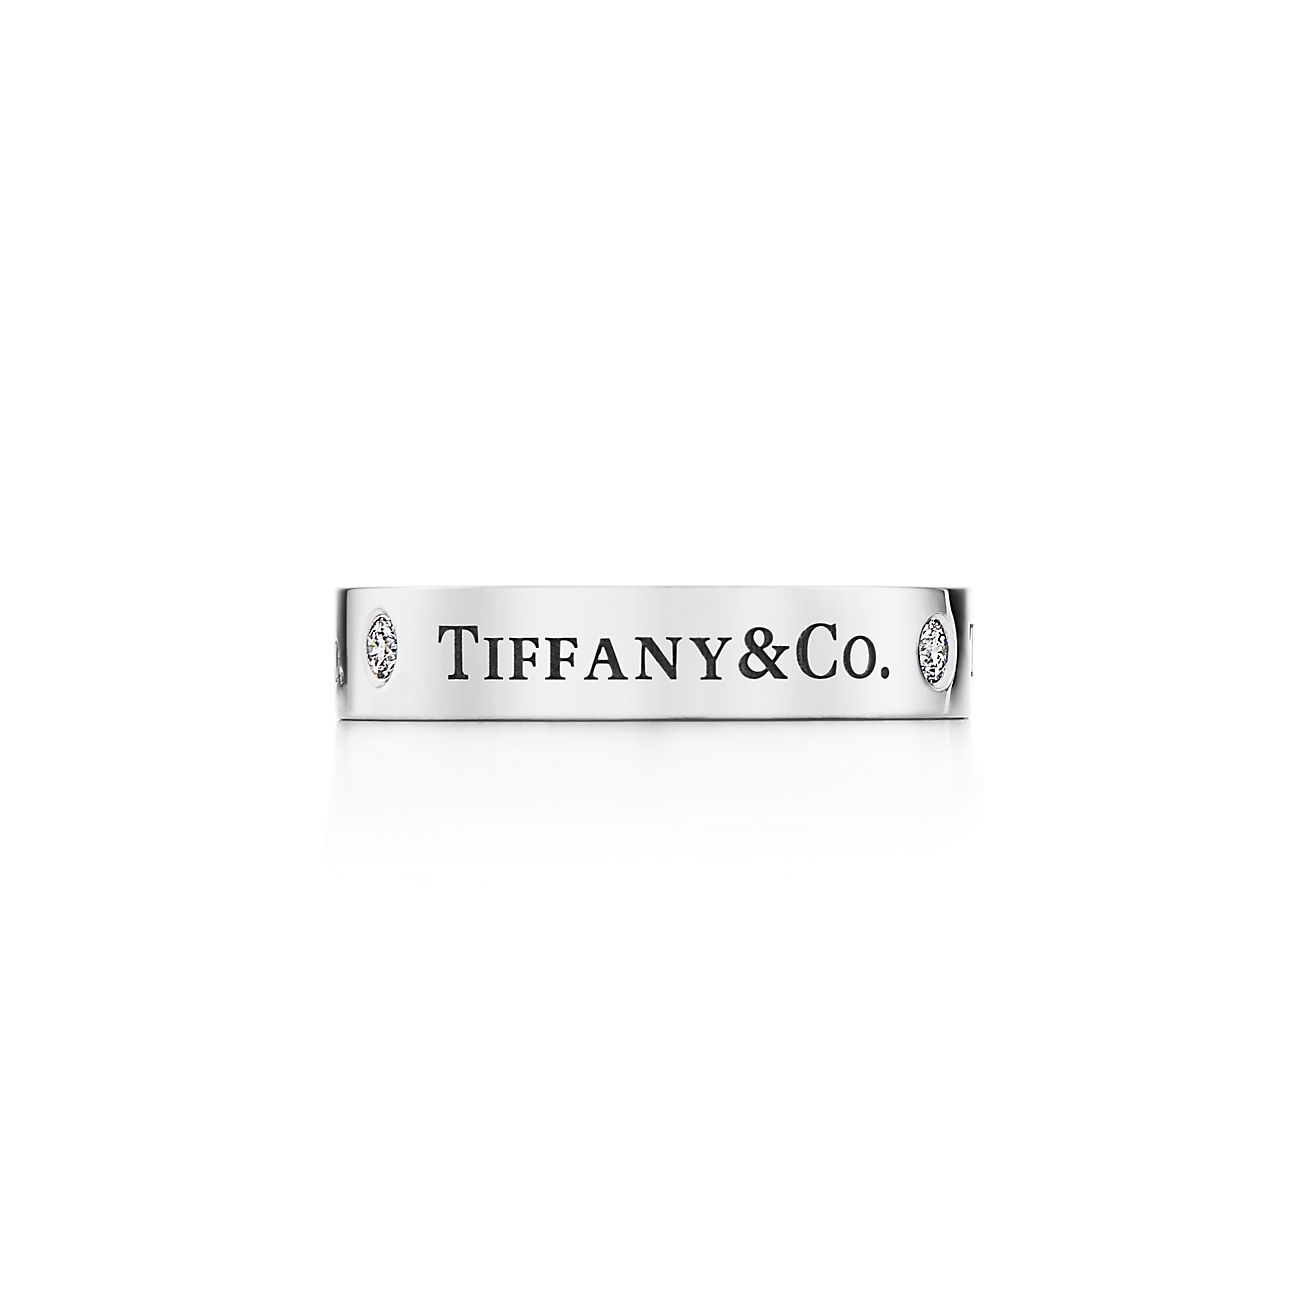 T&CO.® band ring in platinum with diamonds, 4 mm. | Tiffany & Co.